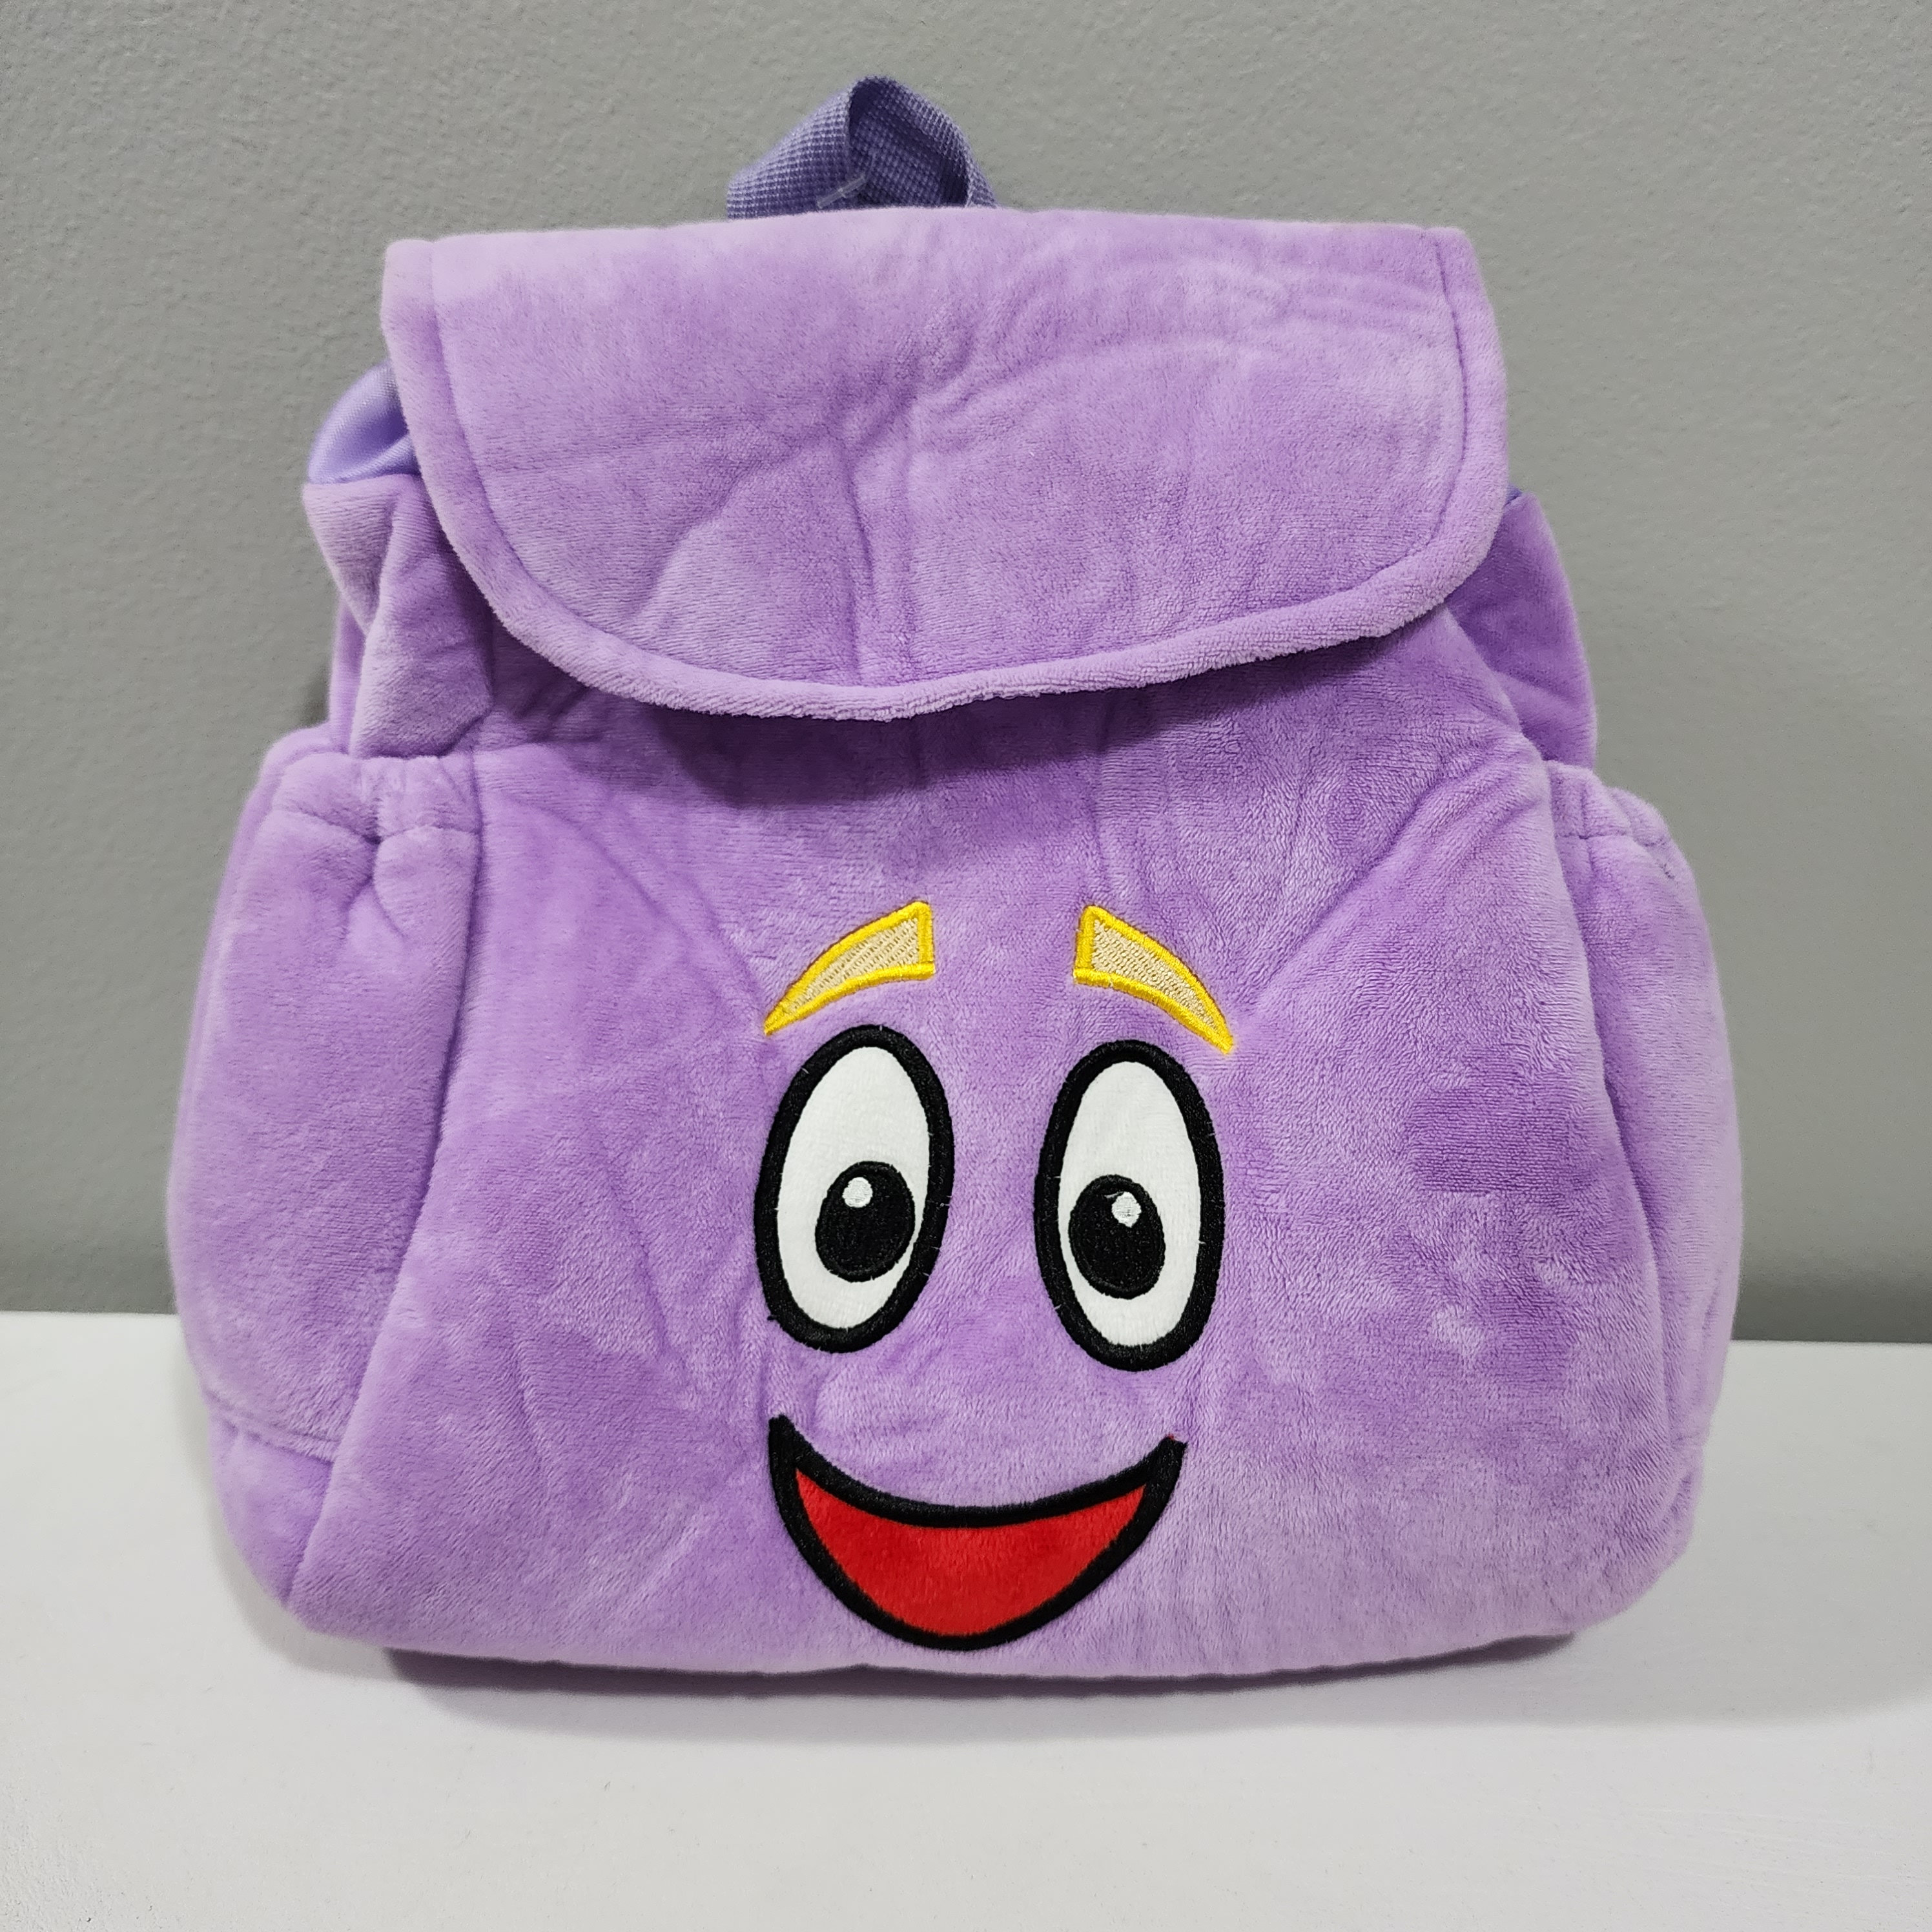 Dora The Explorer Backpack On Sale - Free shopping -AliExpress